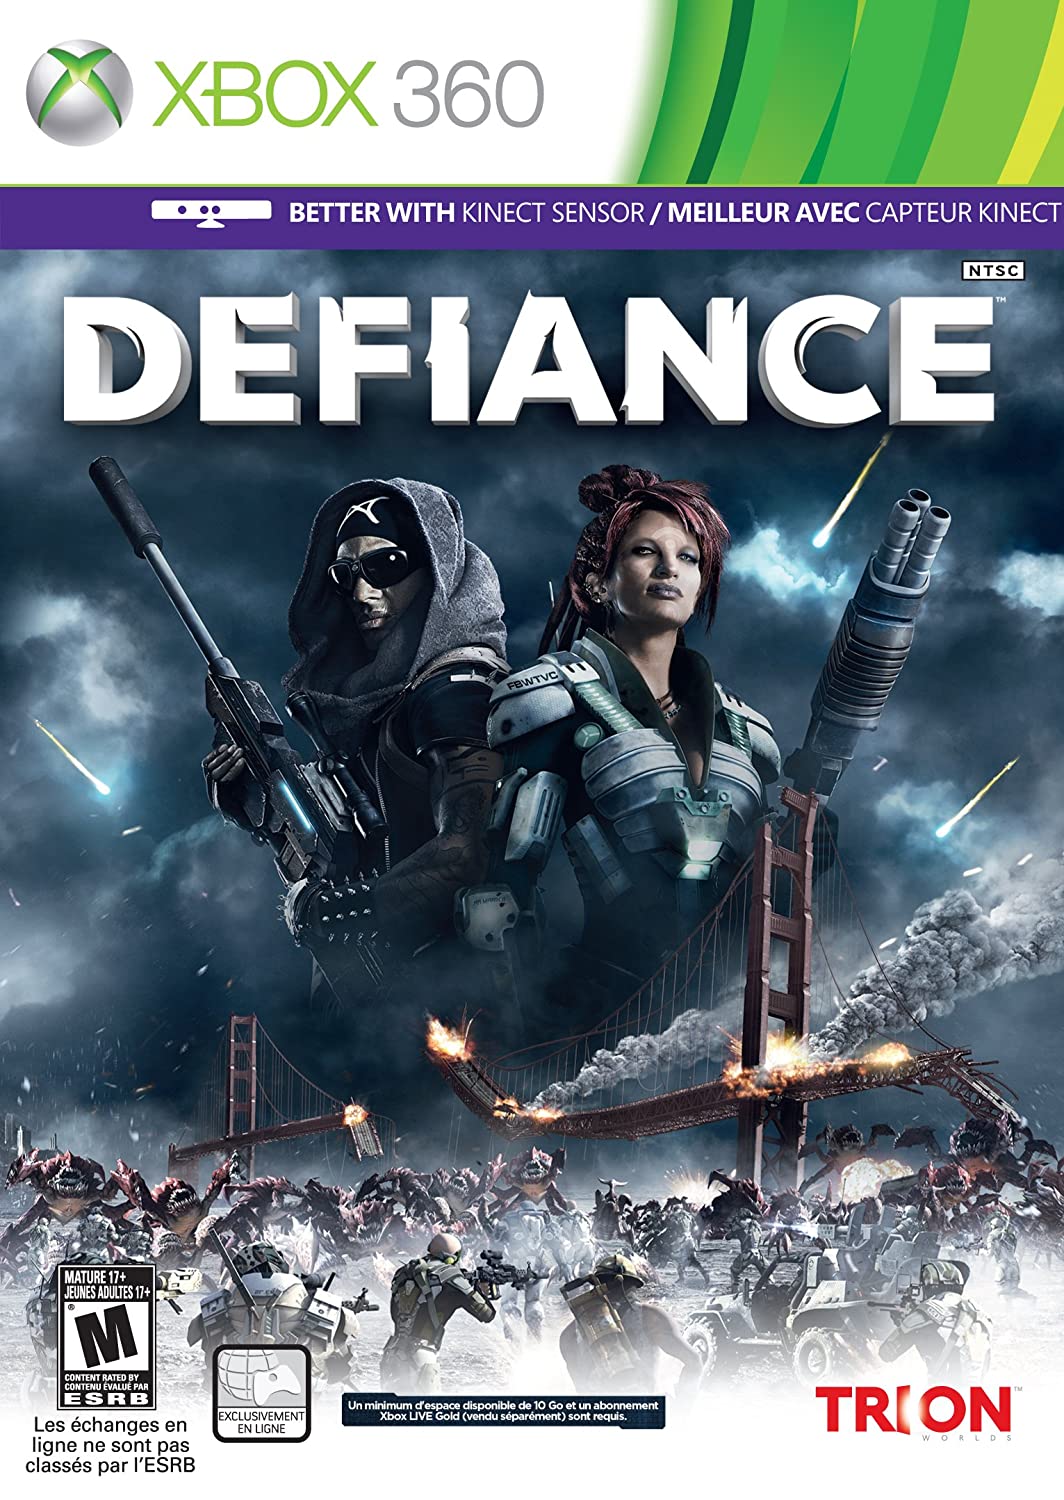 Defiance player count stats